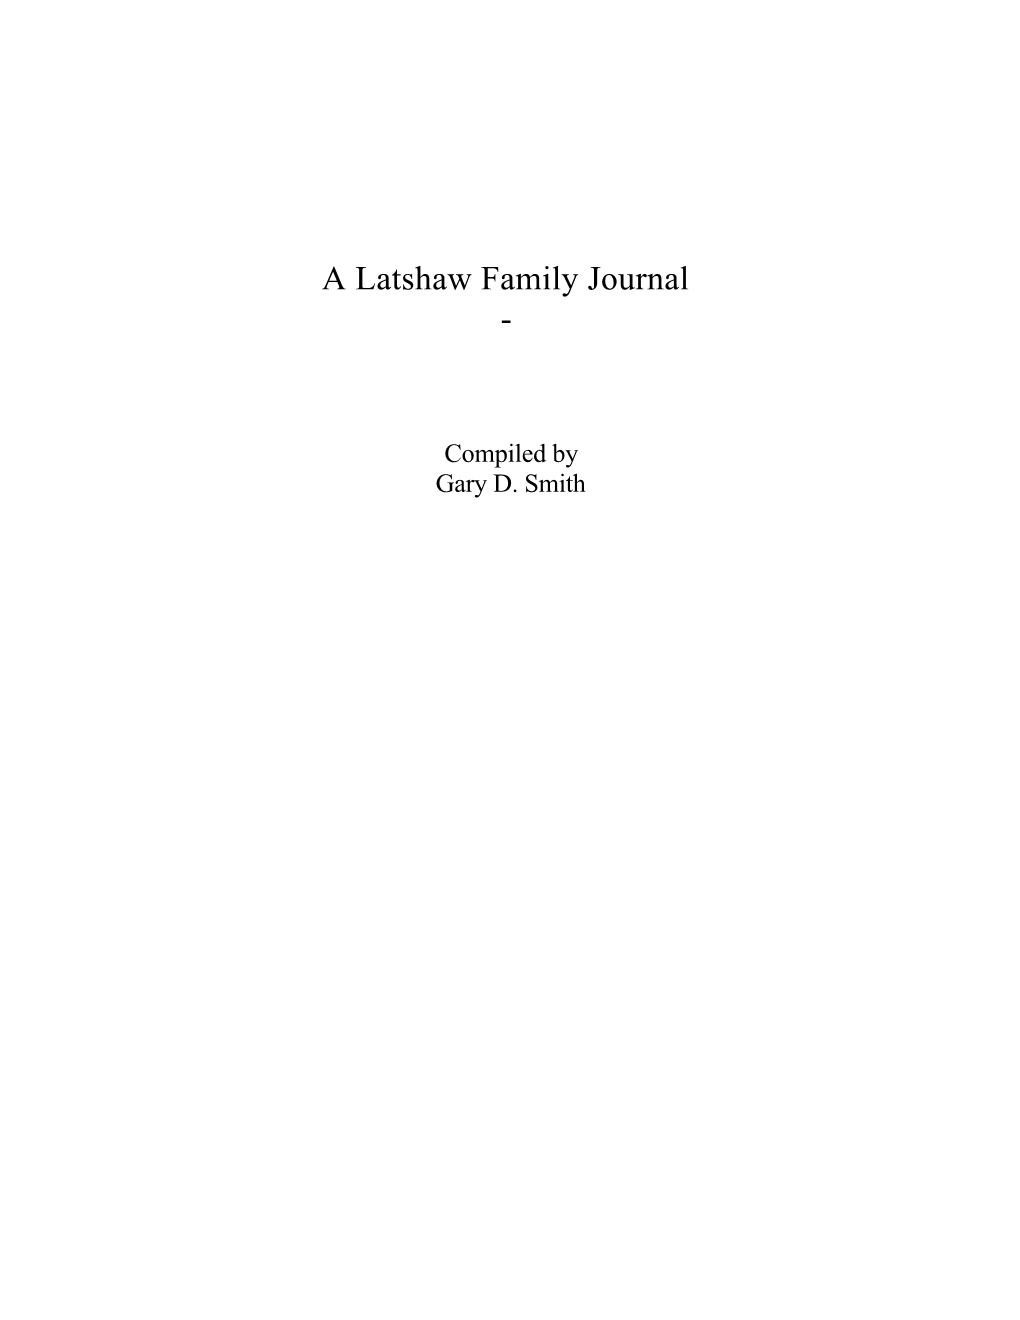 A Latshaw Family Journal